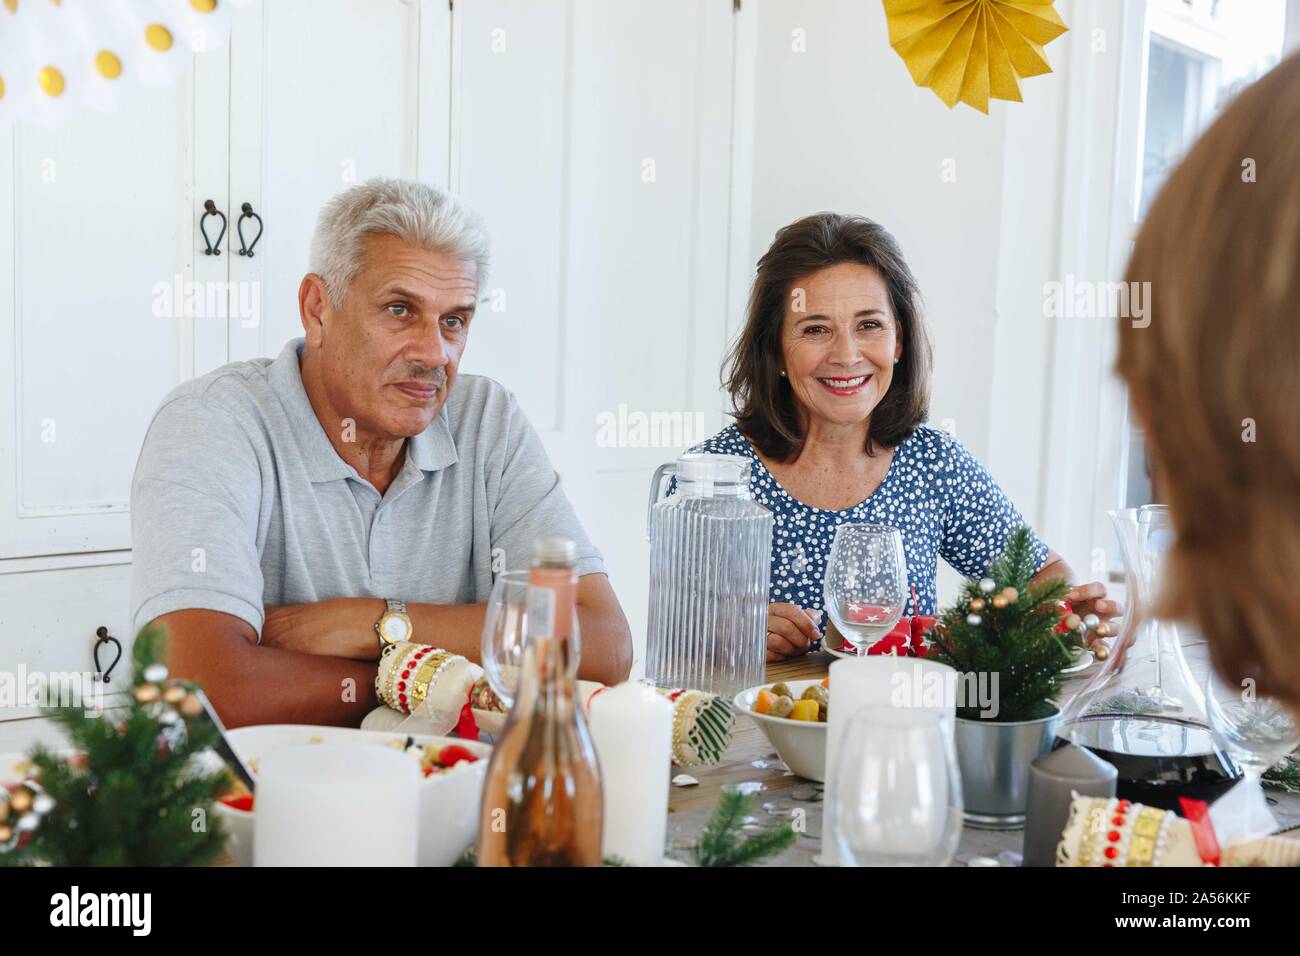 Senior couple talking with family at home party Stock Photo